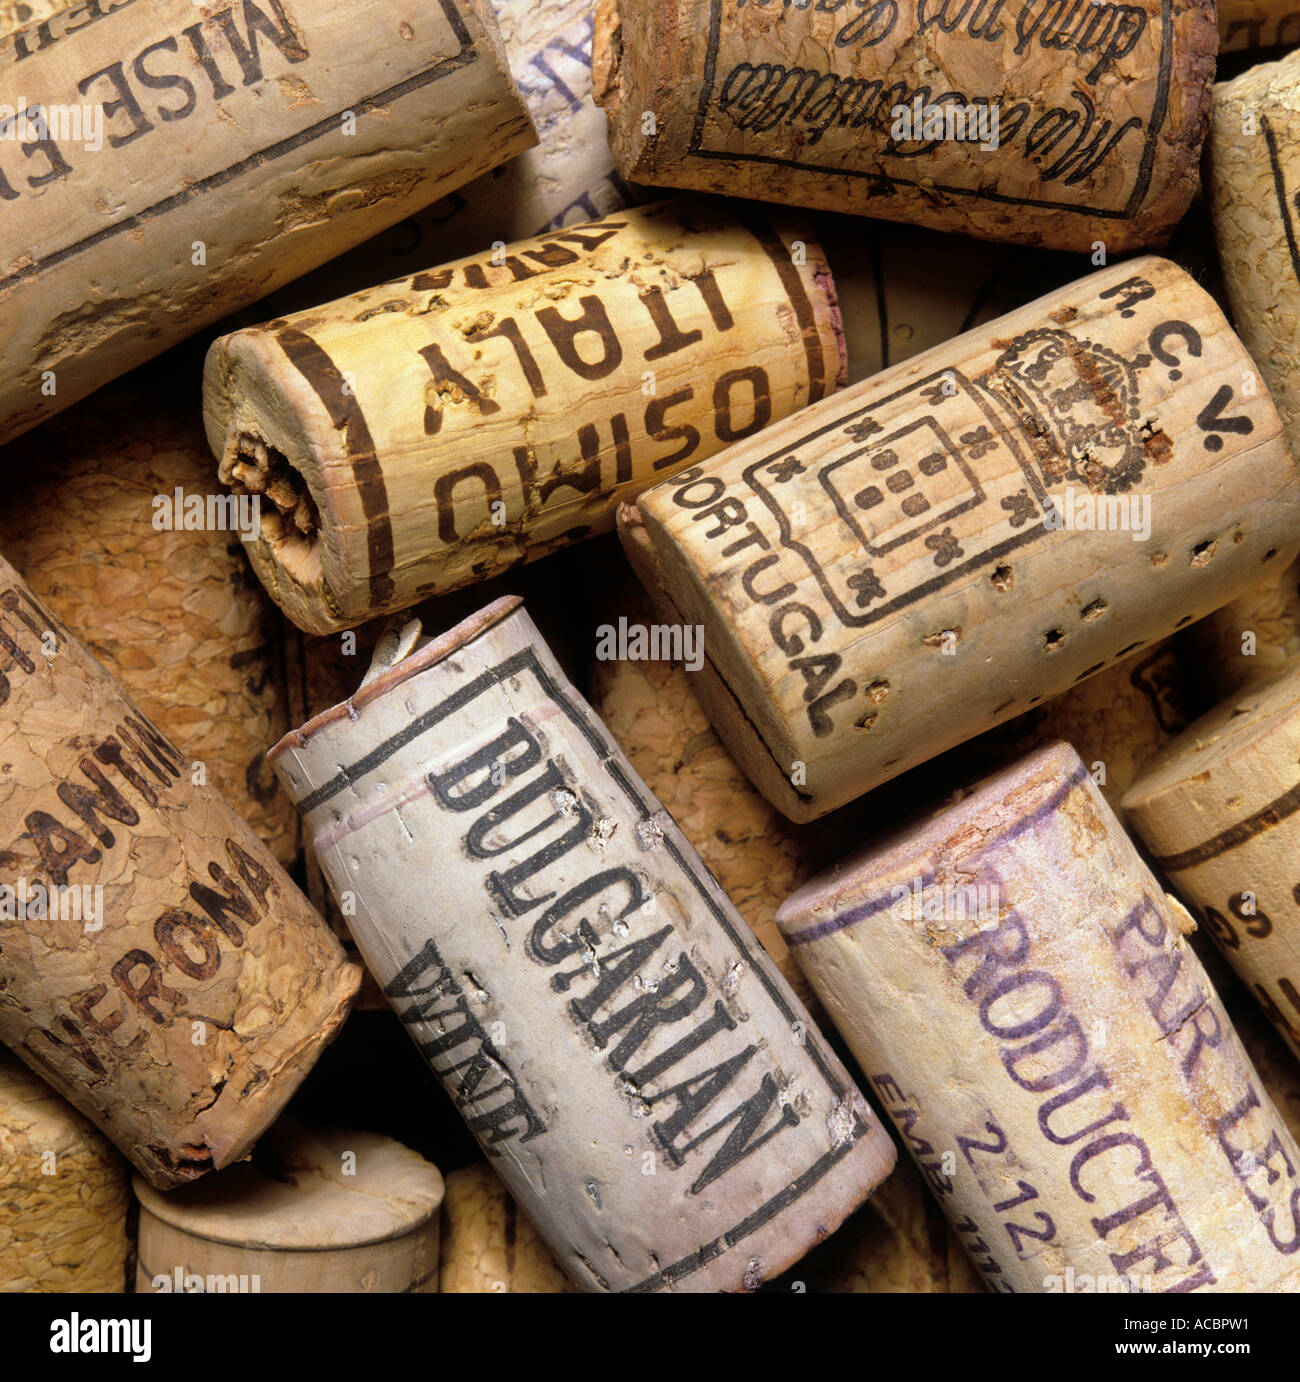 wine corks editorial use only Stock Photo